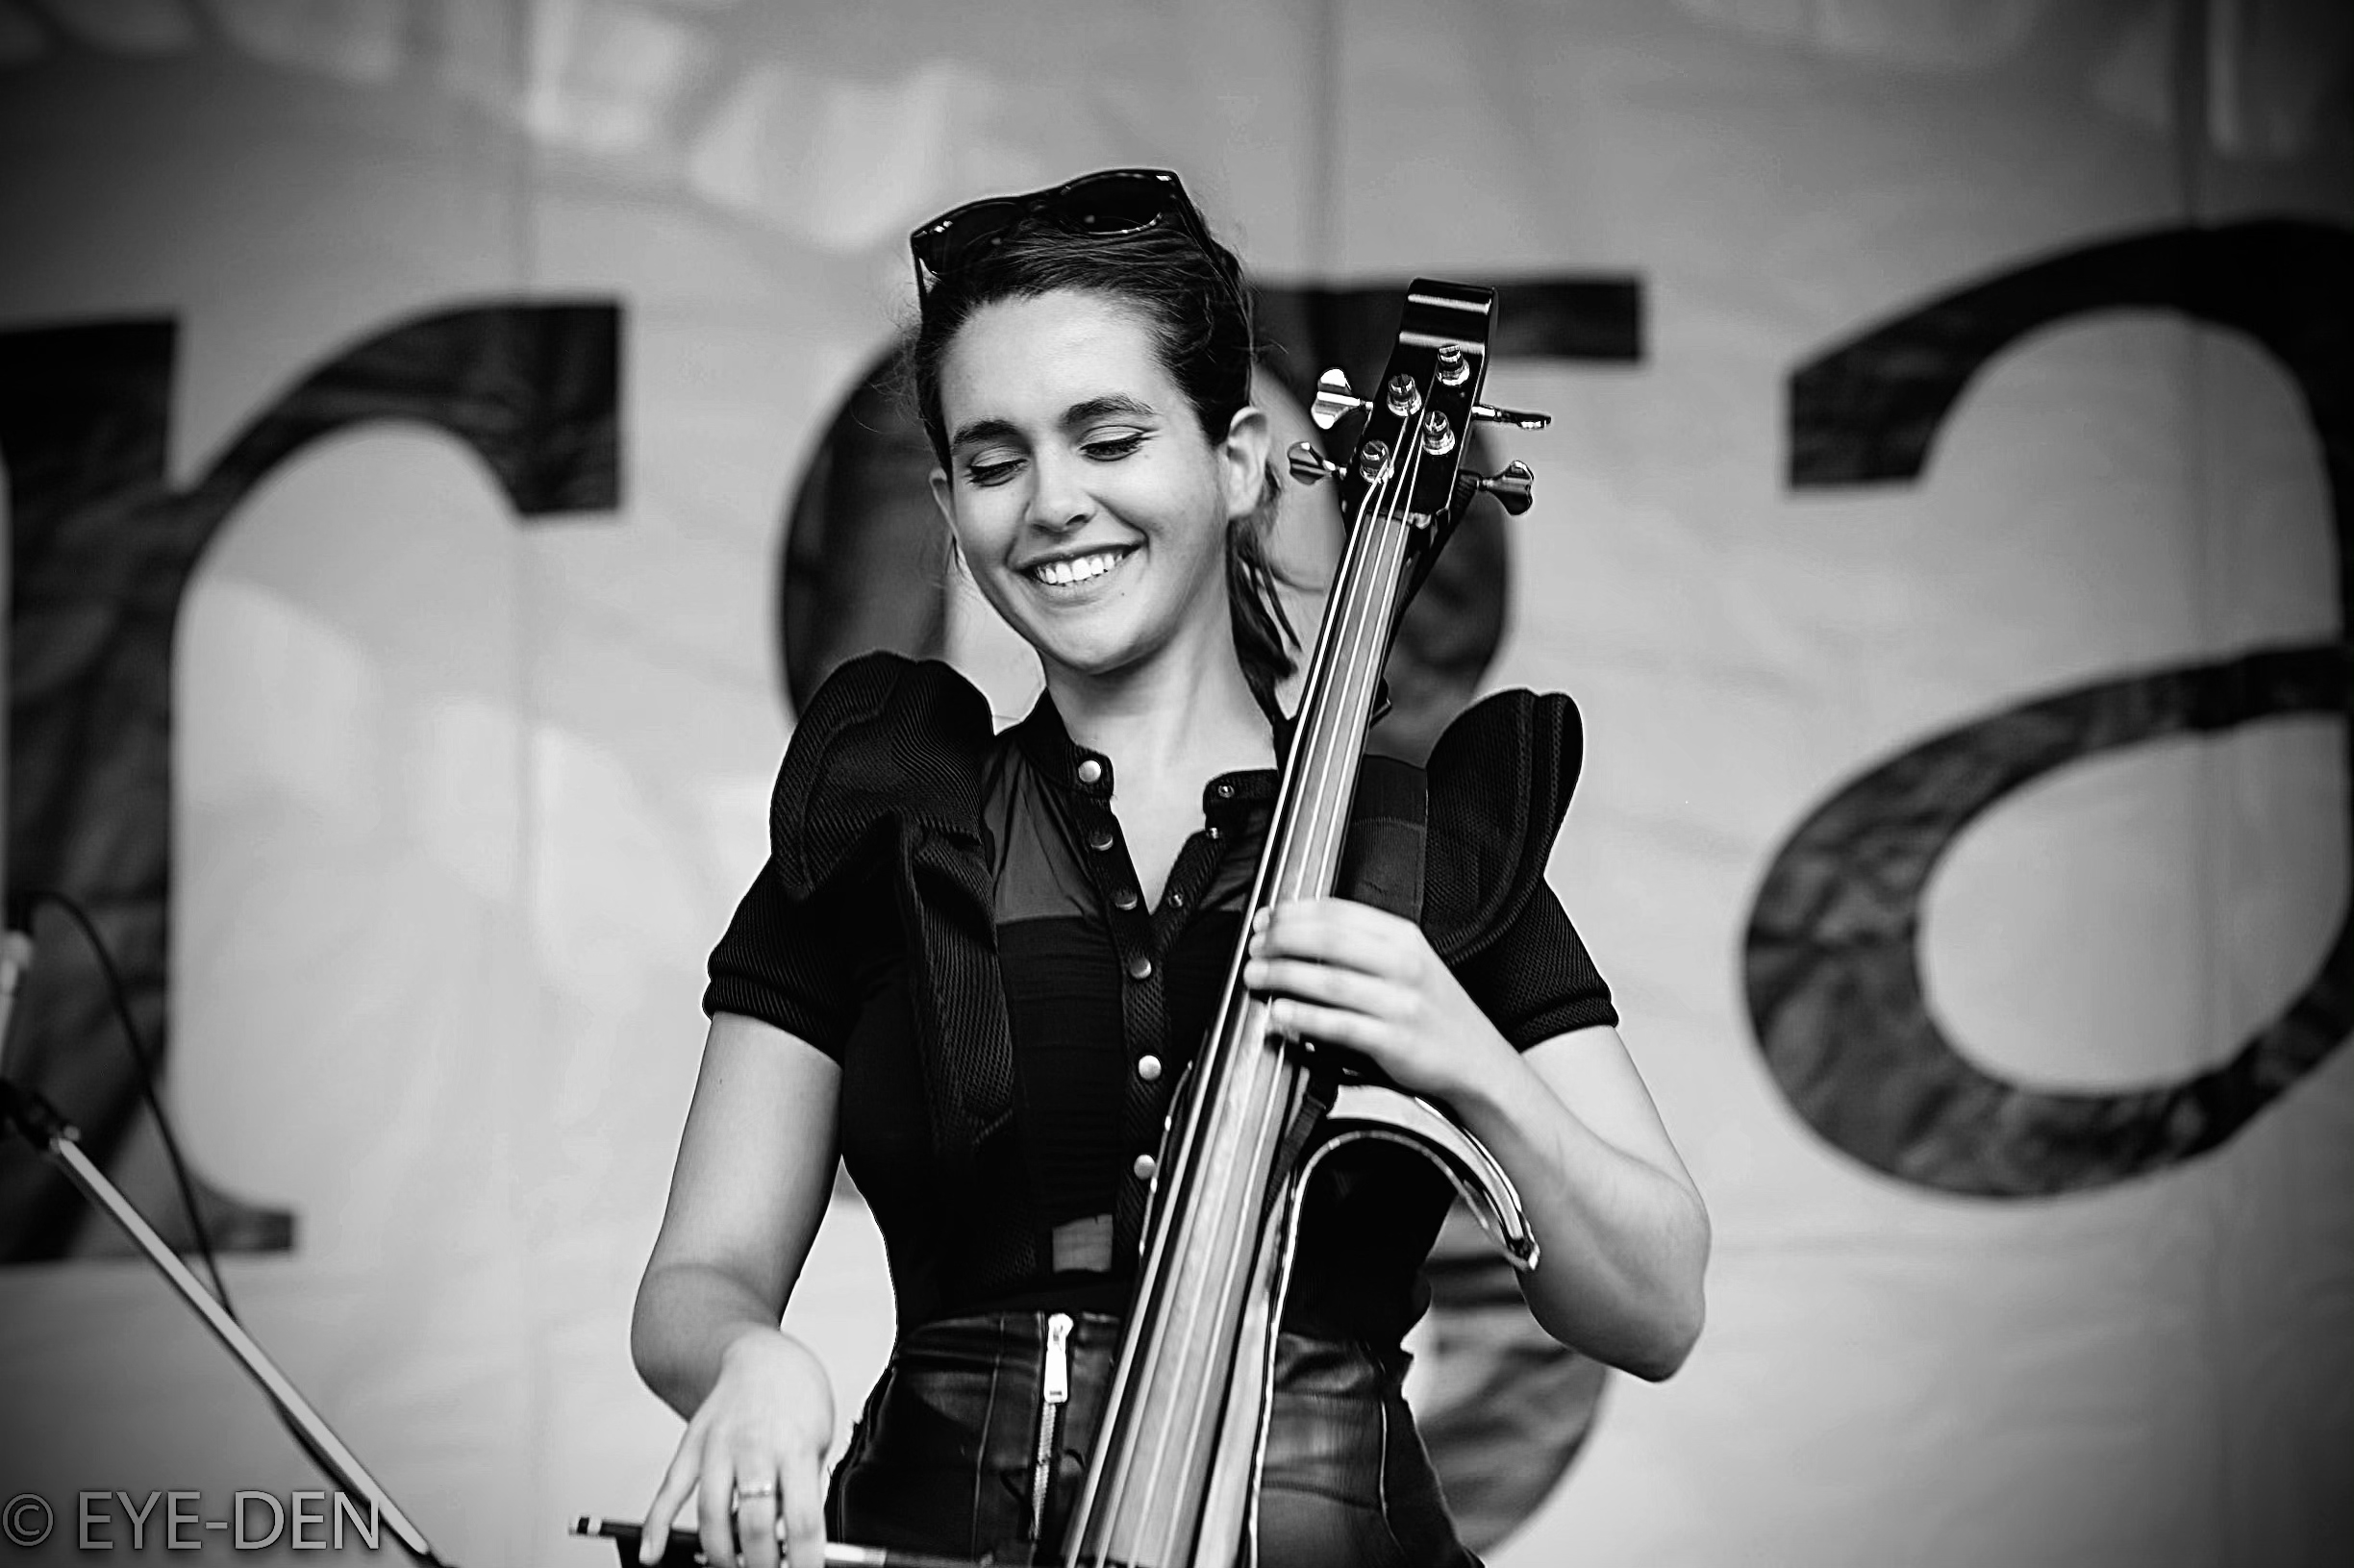 Darya Zonoozi, performing on her Yamaha Electric cello at Tirgan Festival with an Iraninan/Canadian Band, Bjahan in Toronto, Canada - Summer 2019 Photo by Eyedebimagery